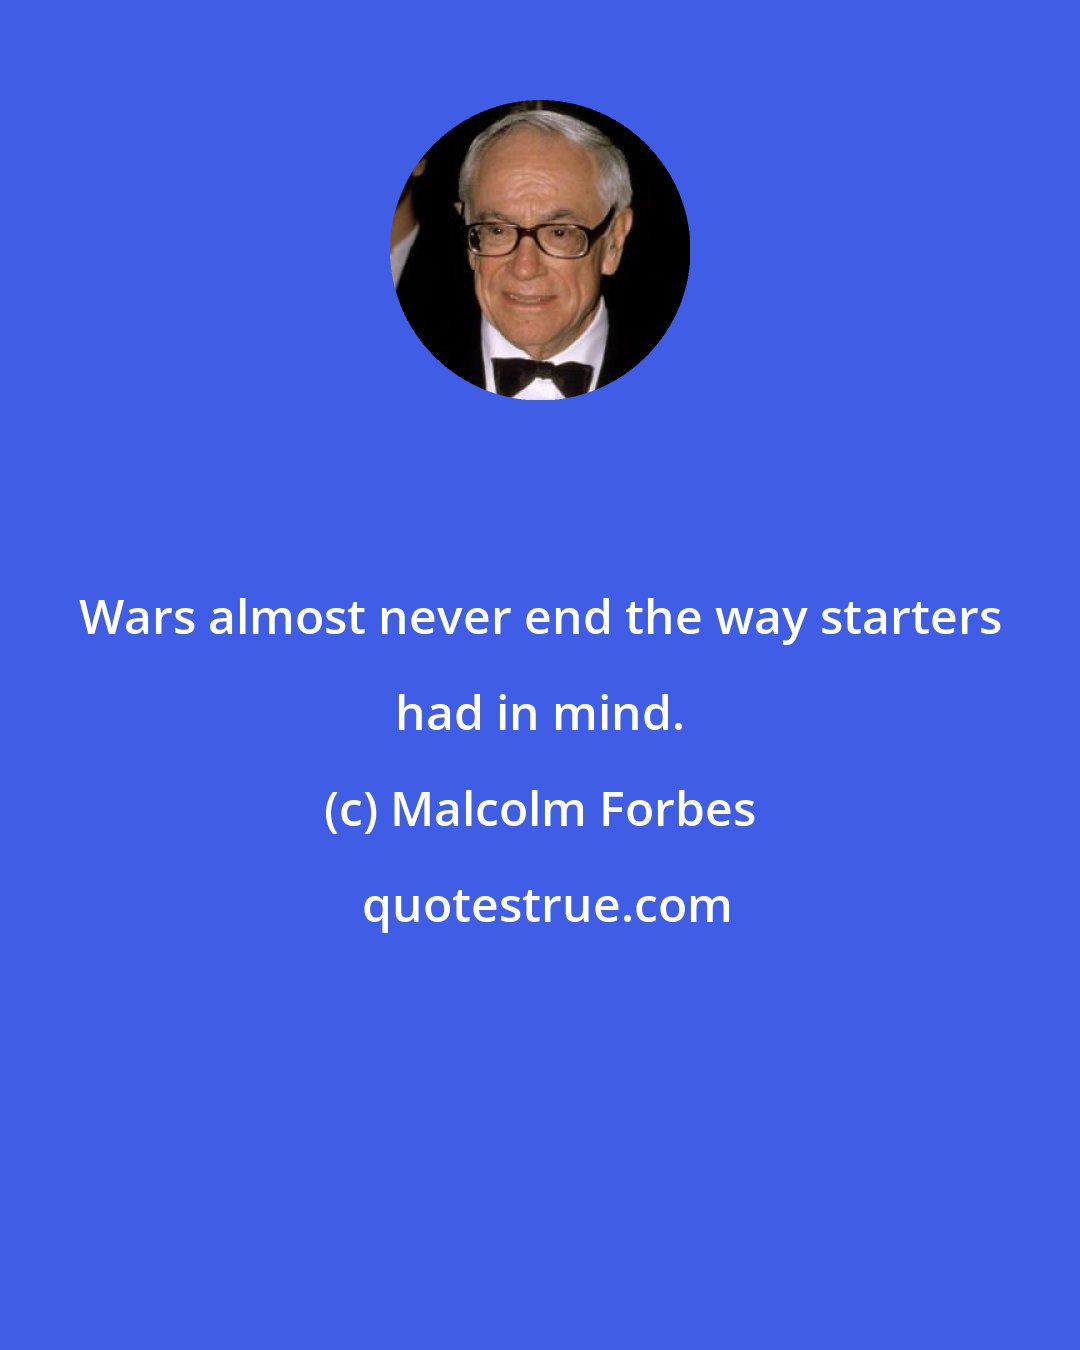 Malcolm Forbes: Wars almost never end the way starters had in mind.